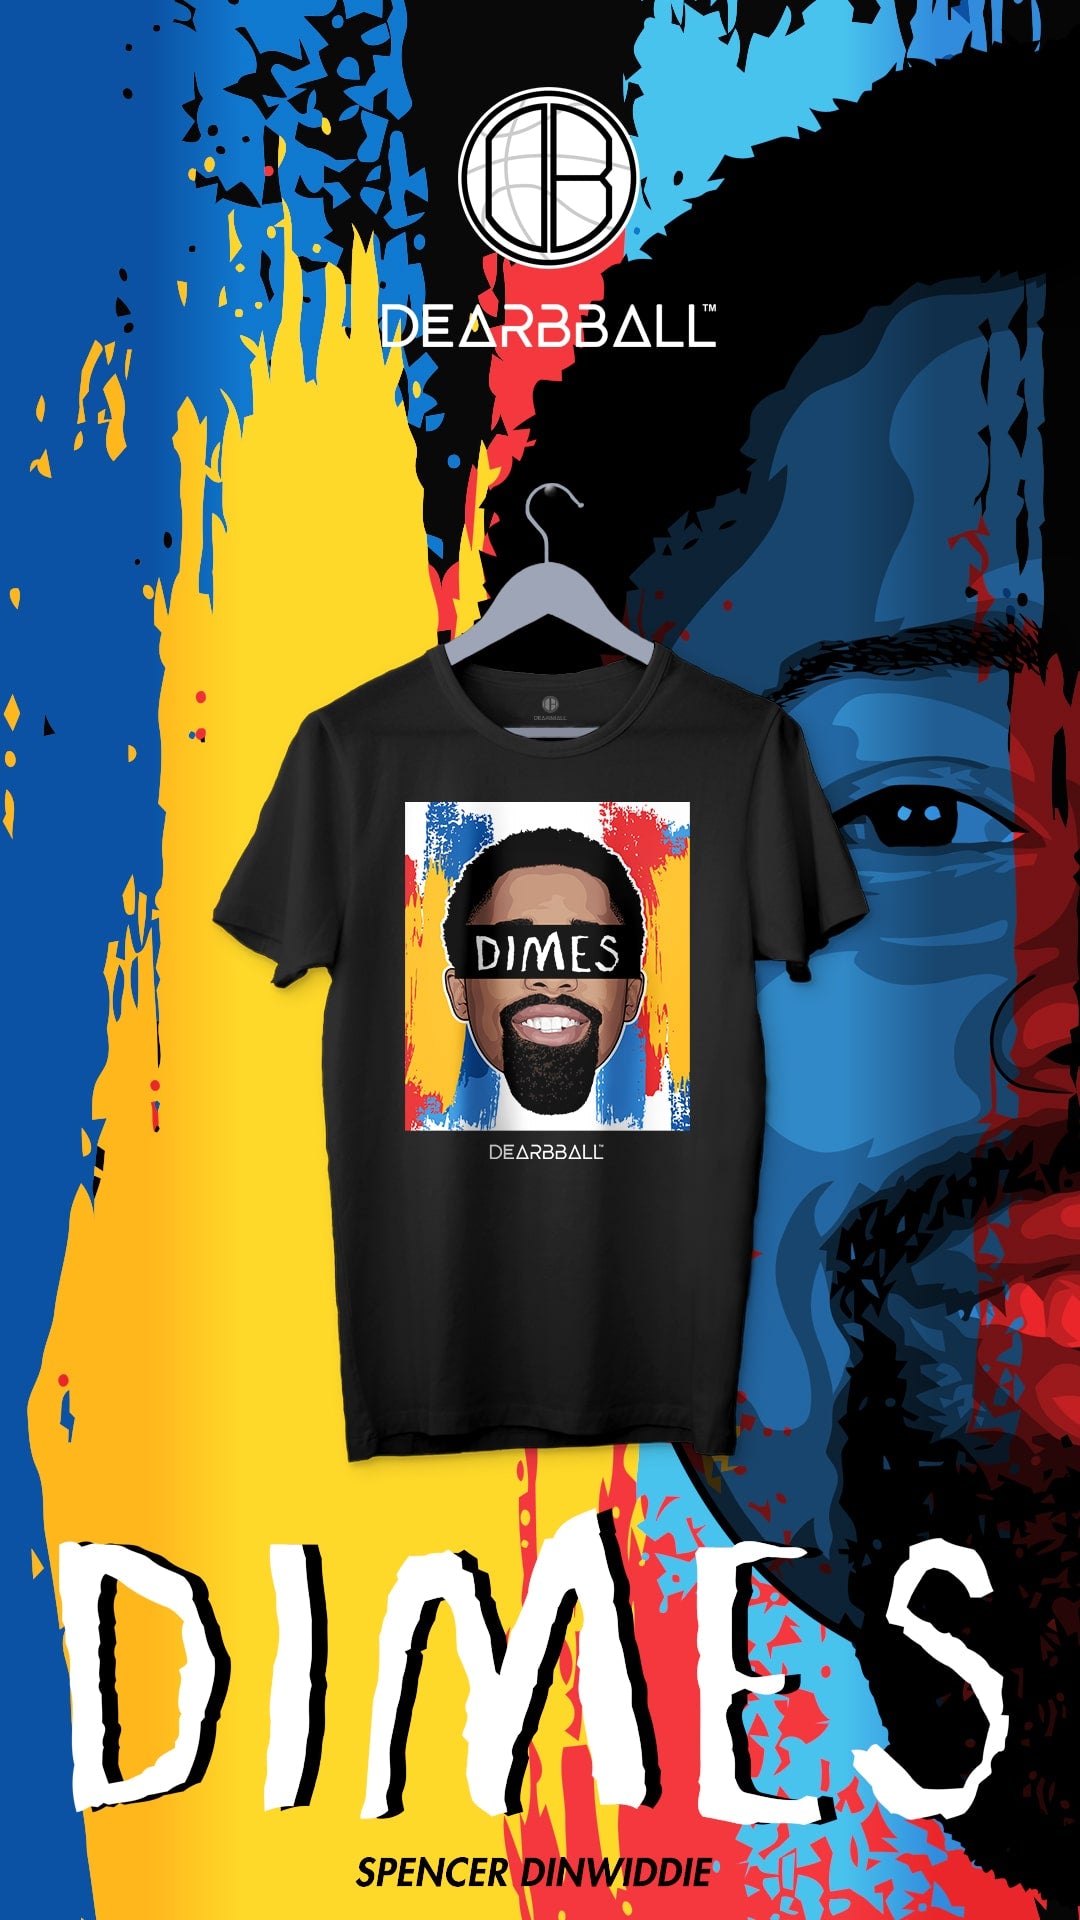 T-Shirt-Spencer-Dinwiddie-Brooklyn-Nets-Dearbball-clothes-brand-france